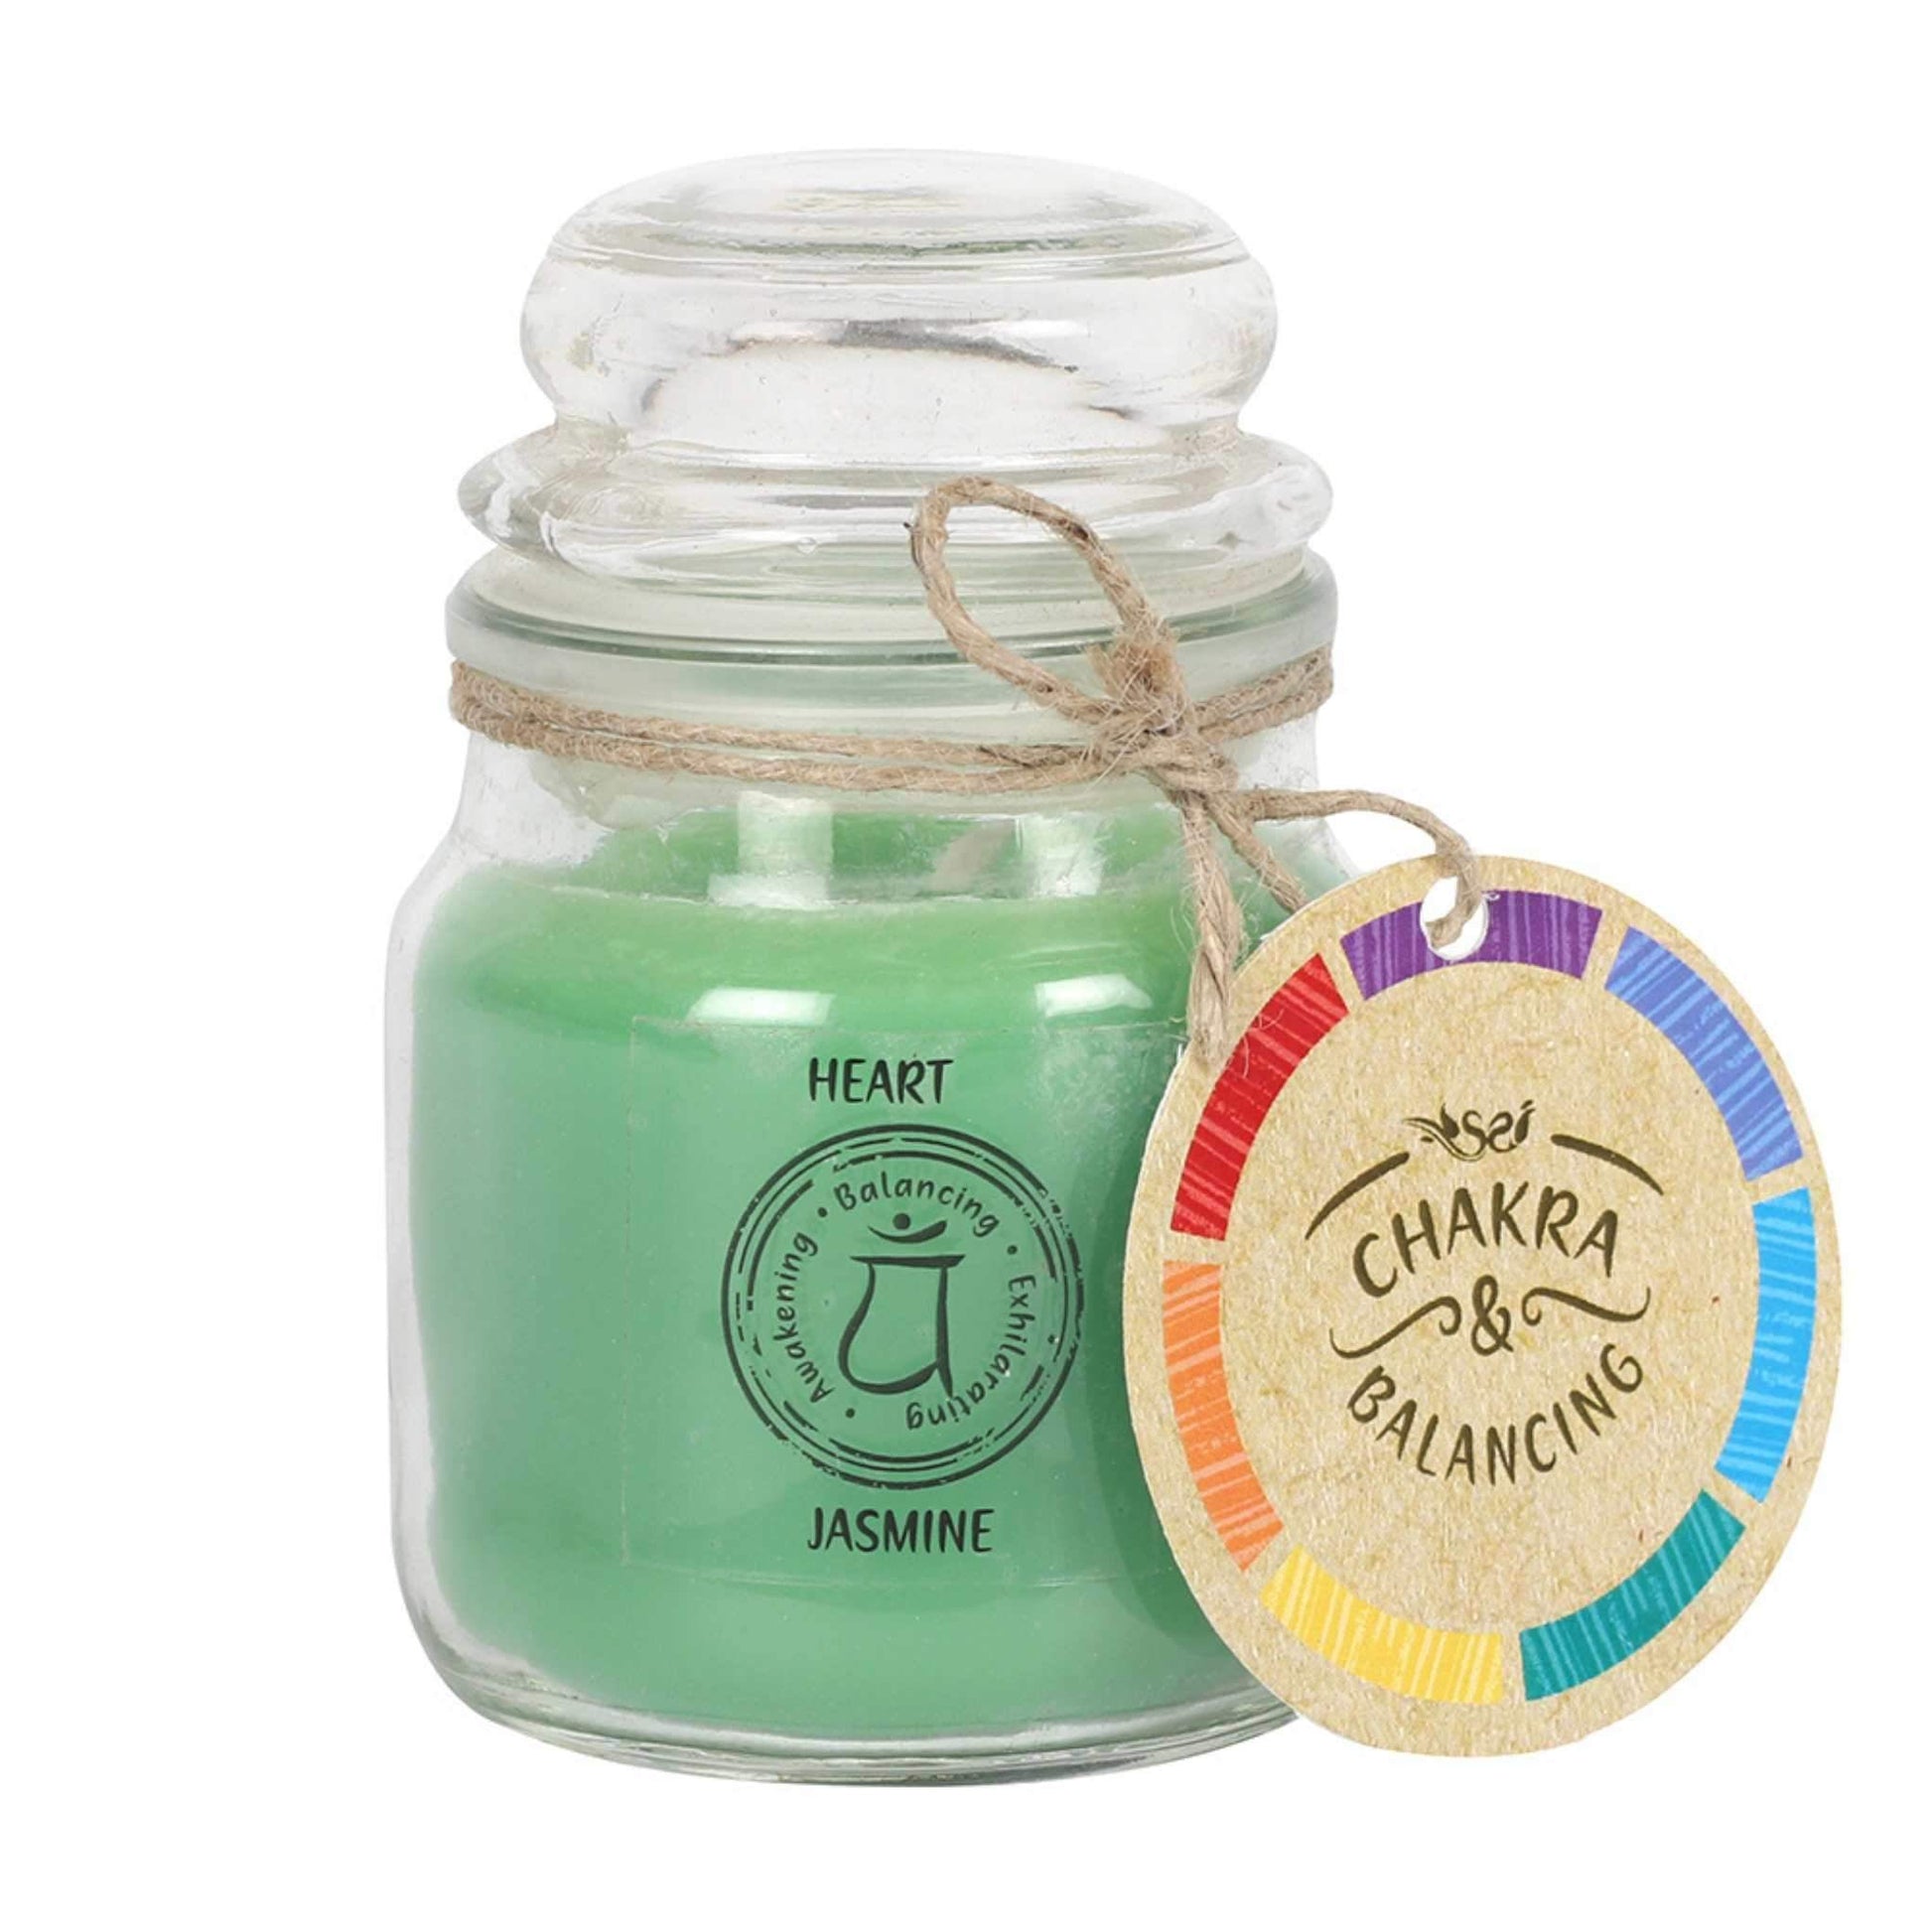 Balancing Chakra Candle in a min glass jar with stopper. Tied with a label that says Chakra Balancing. Candle is green with a label on the jar that says Heart - Jasmine